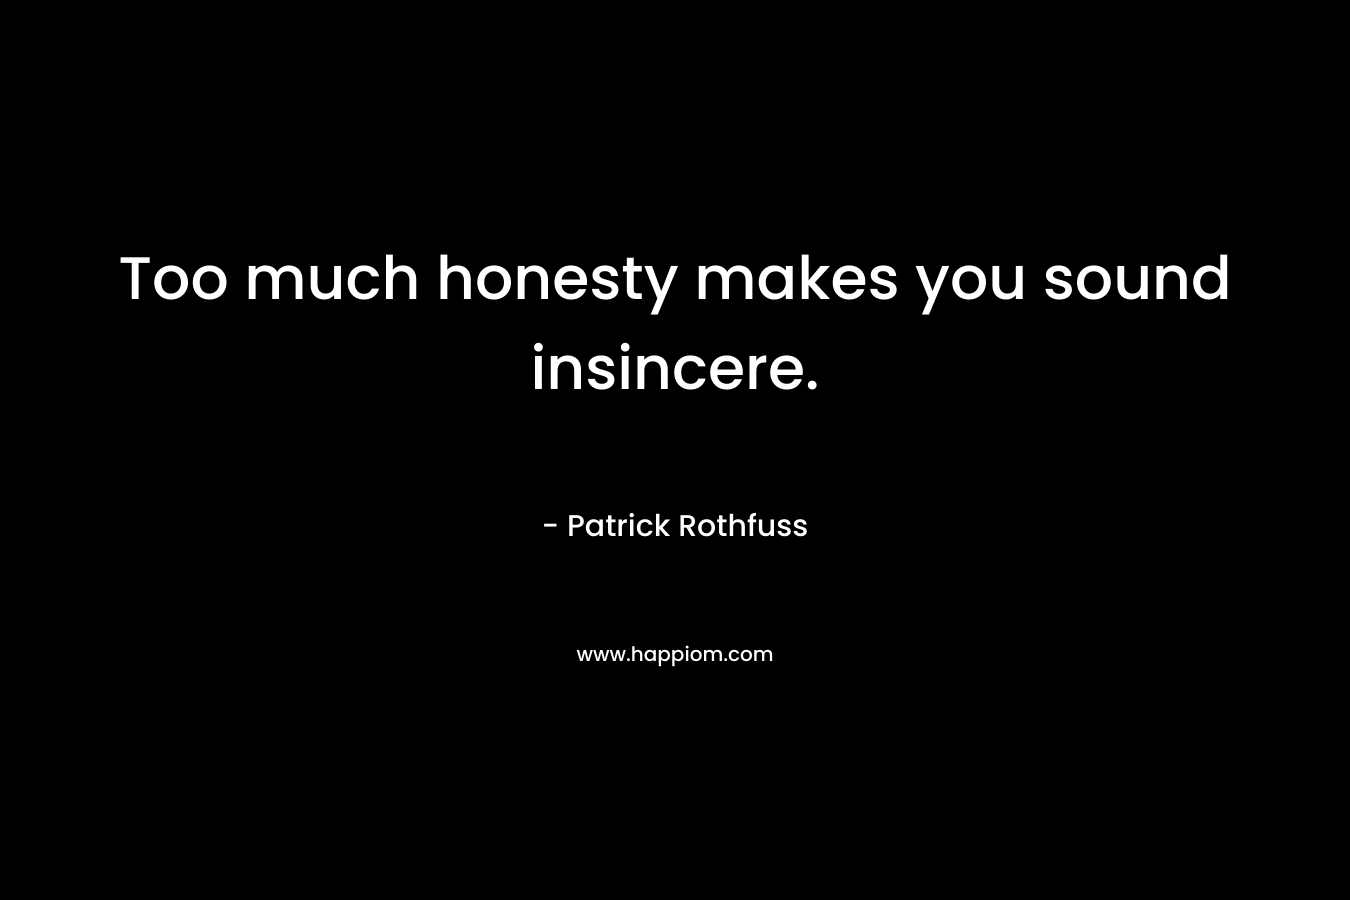 Too much honesty makes you sound insincere.